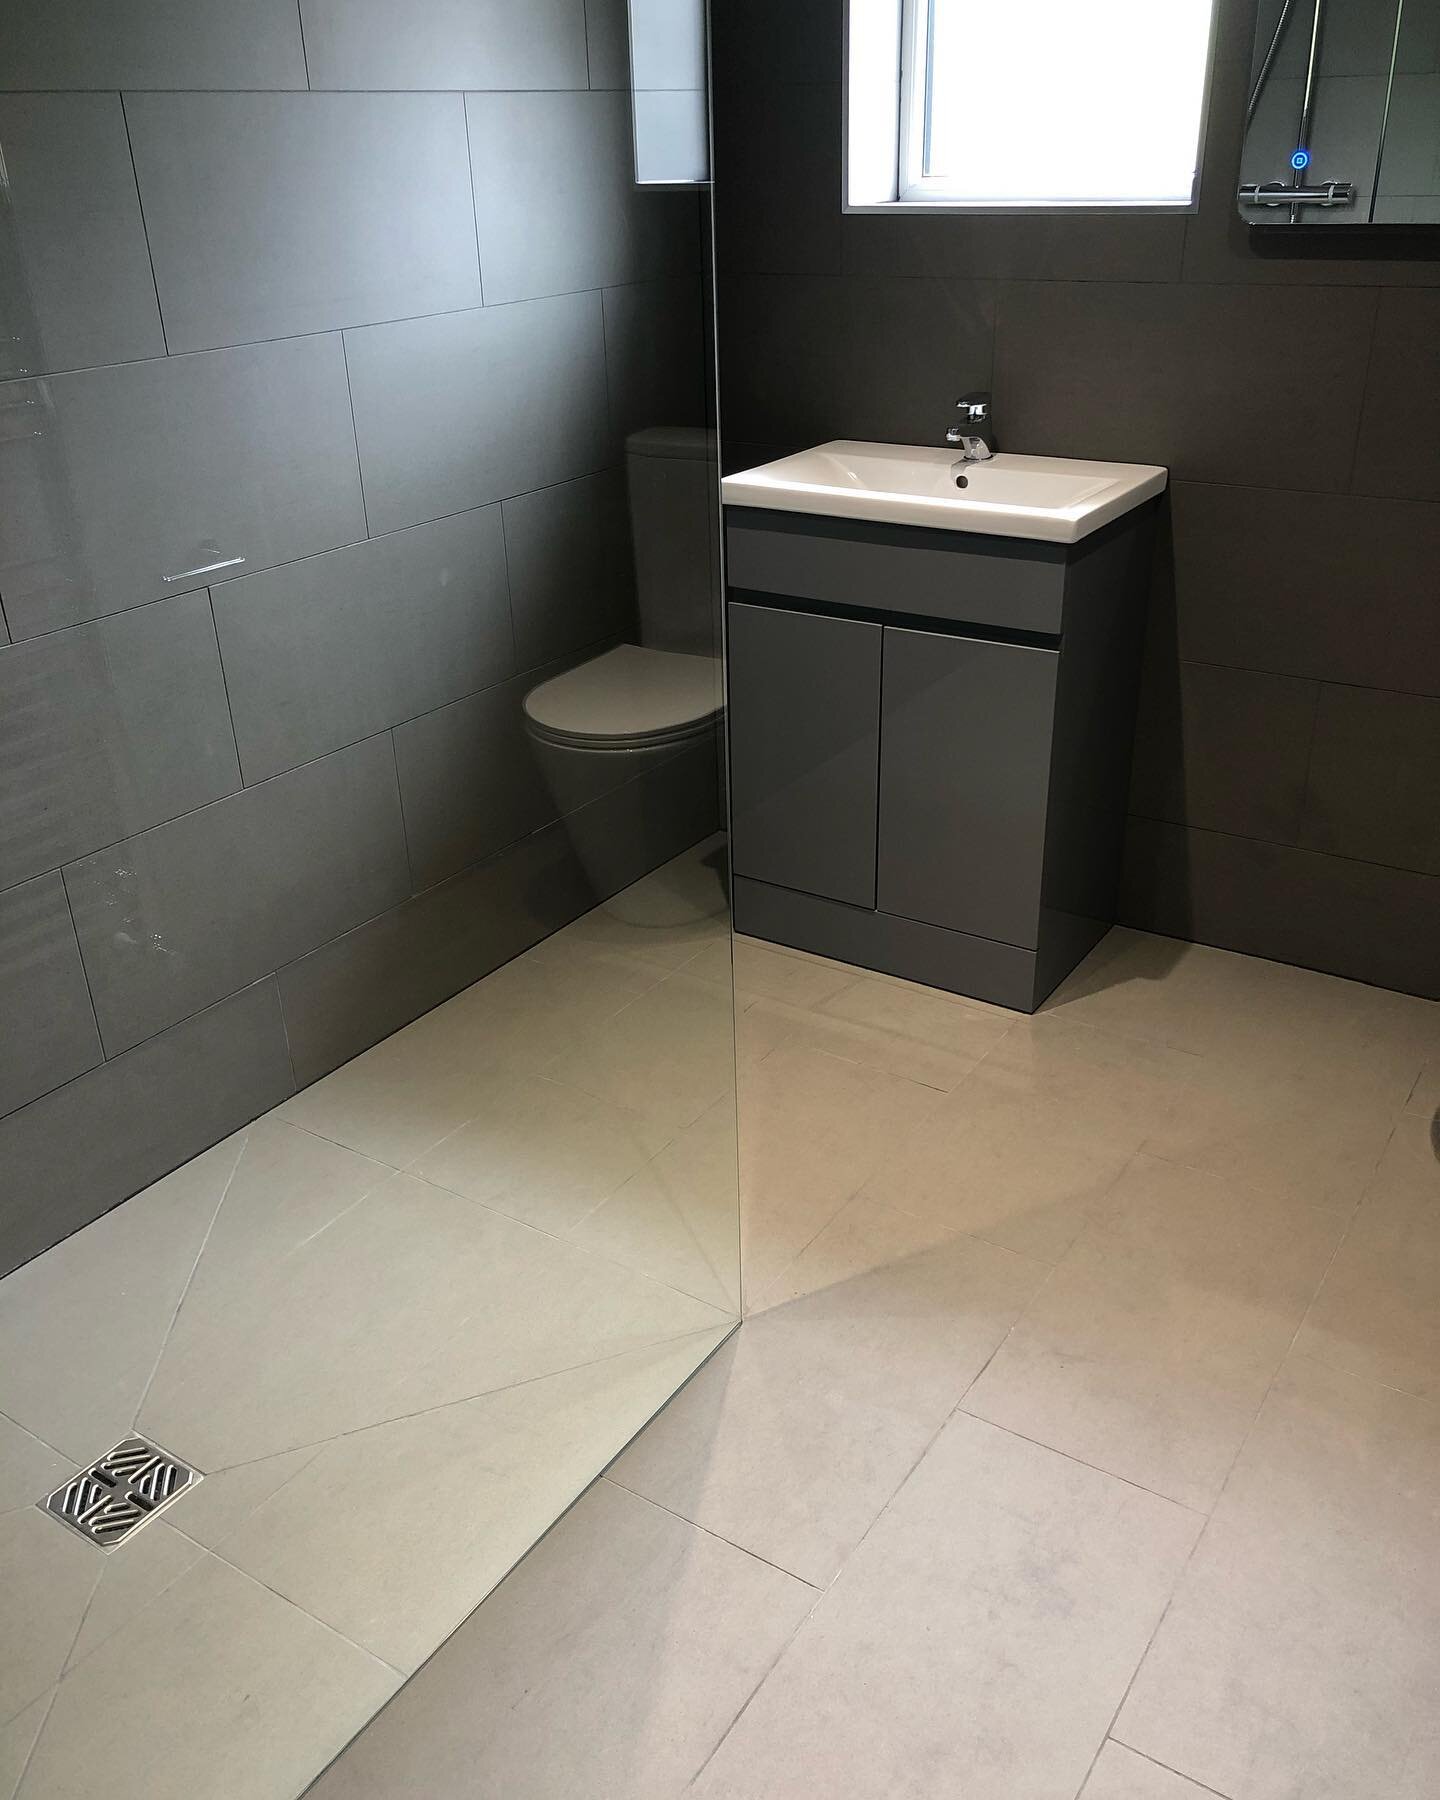 Just completed this little beauty for Paul in Rochdale

This similar to an en suite we did in Oldham a few months ago. Paul had seen the photos and wanted his bathroom to look the same and left the design down to us. 

The previous install was done v